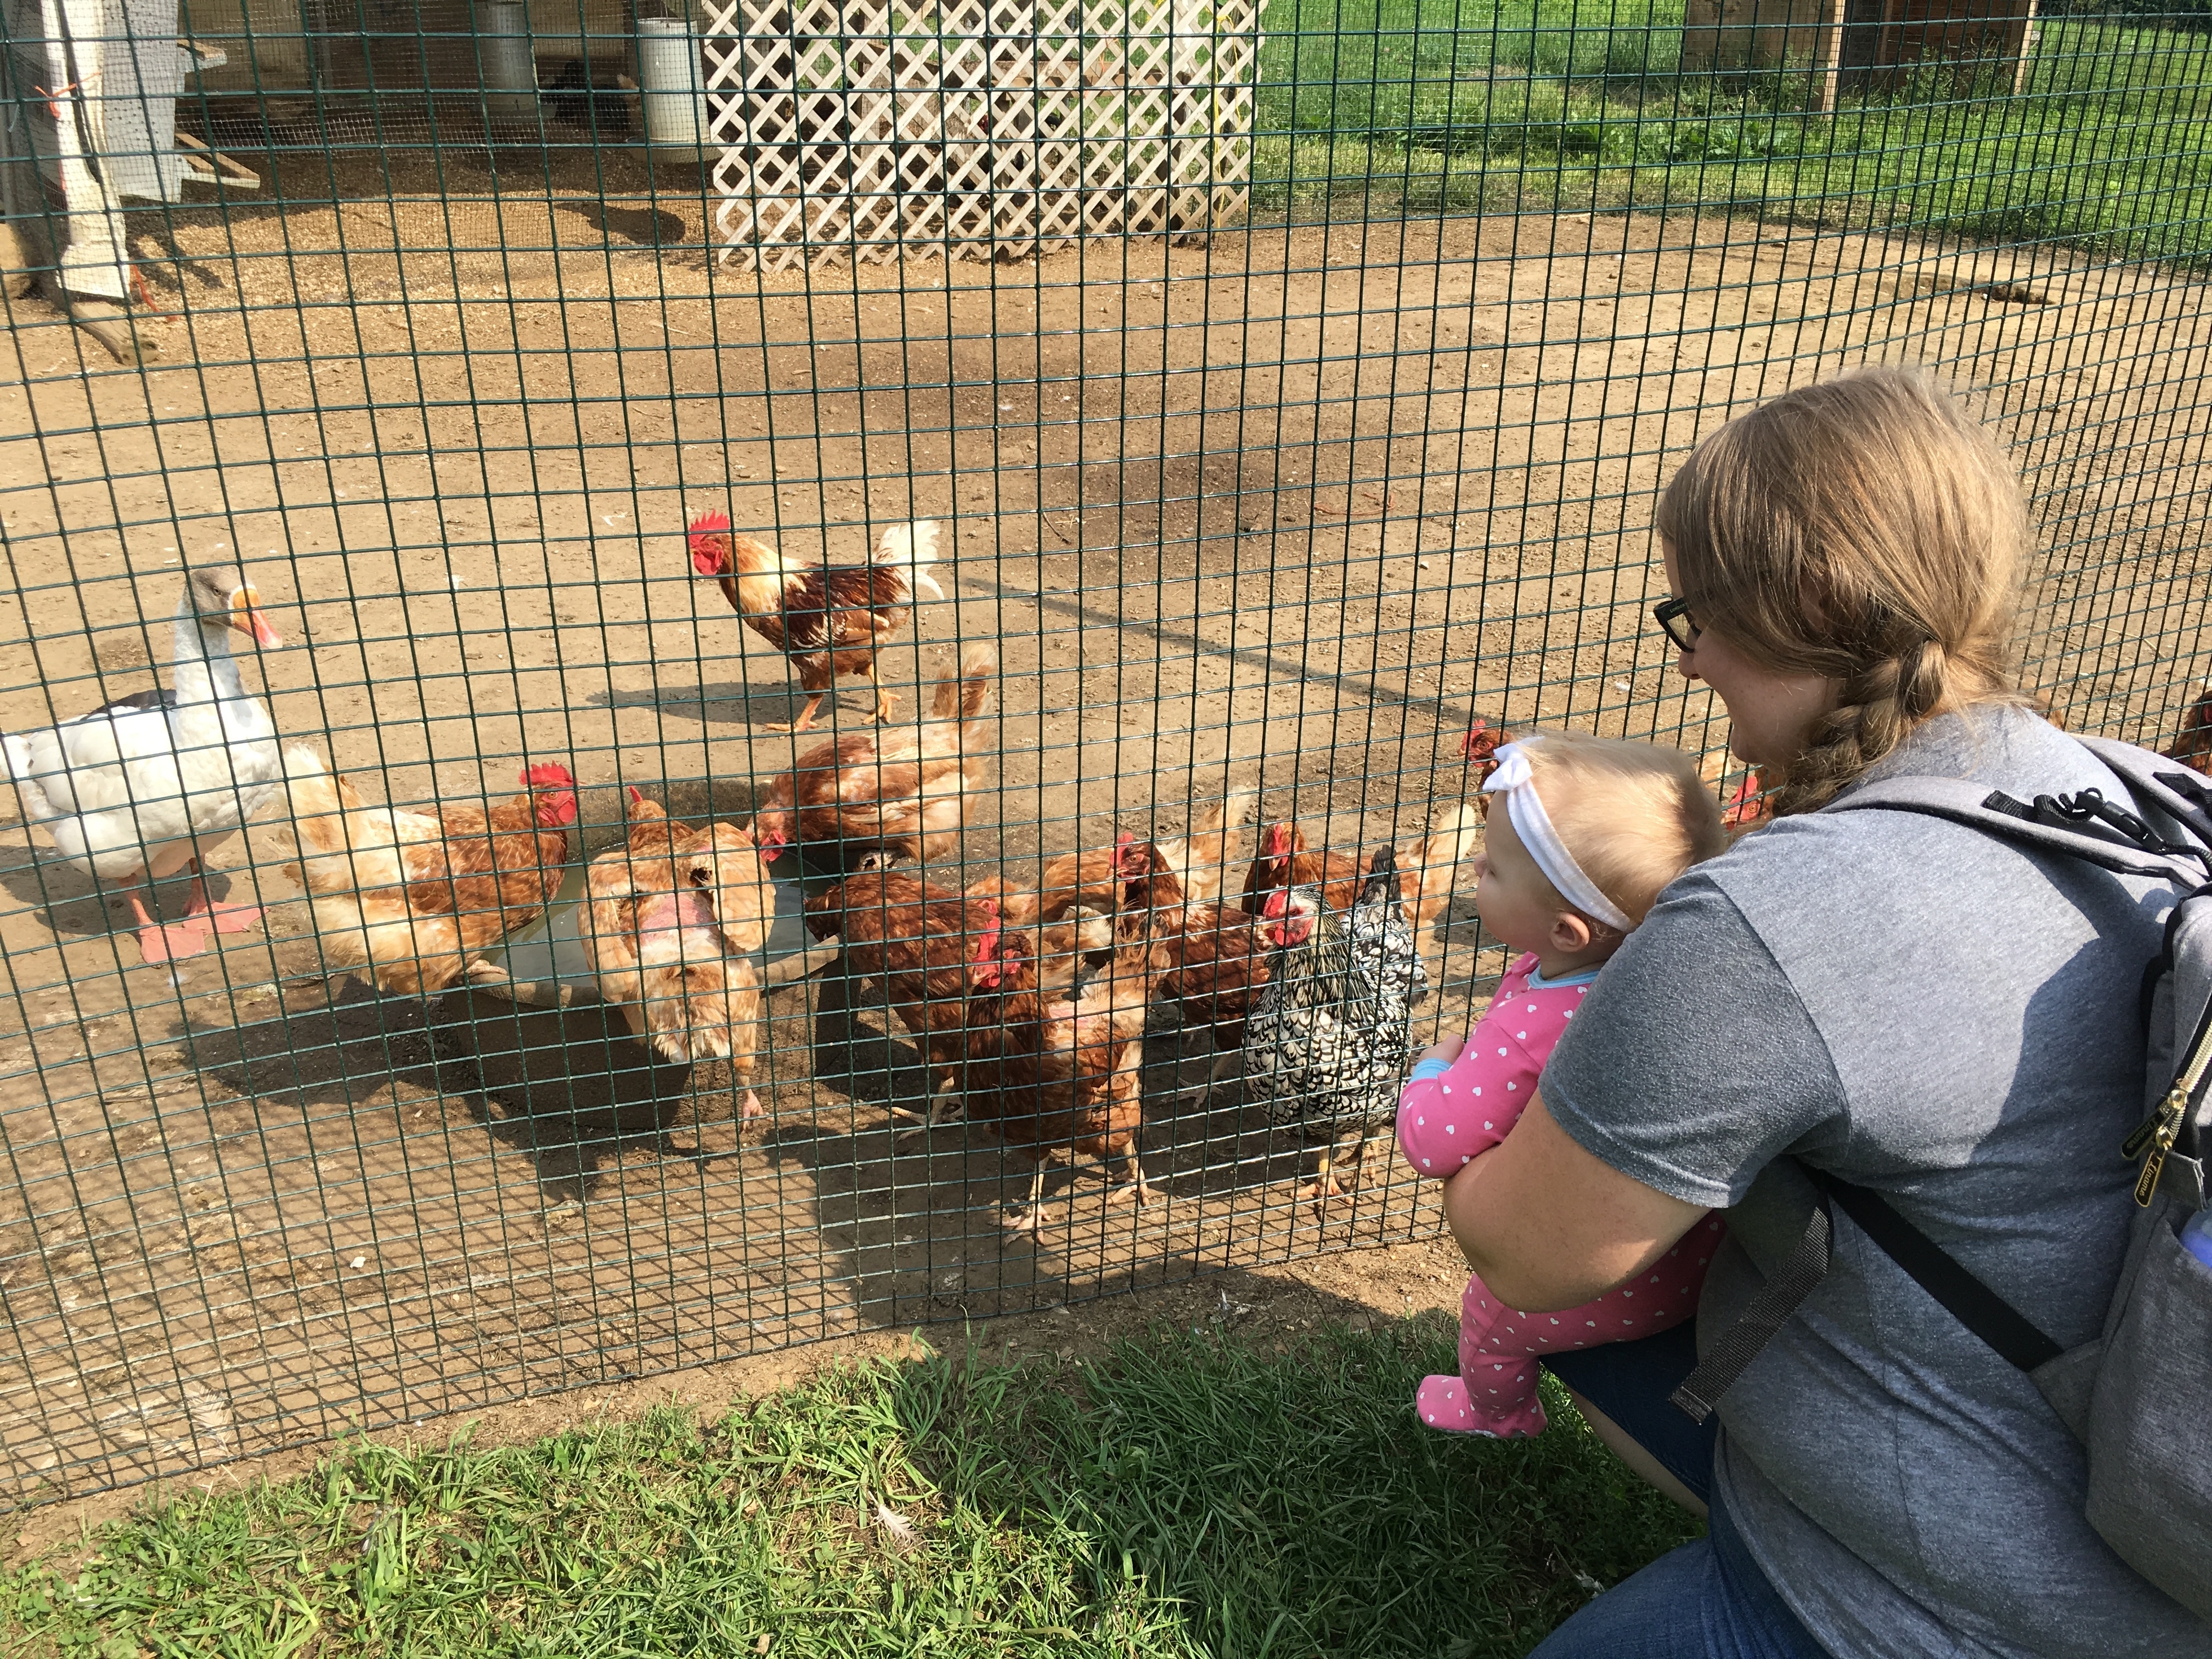 Lucy looking at chickens at the Heritage Farm Pancake House